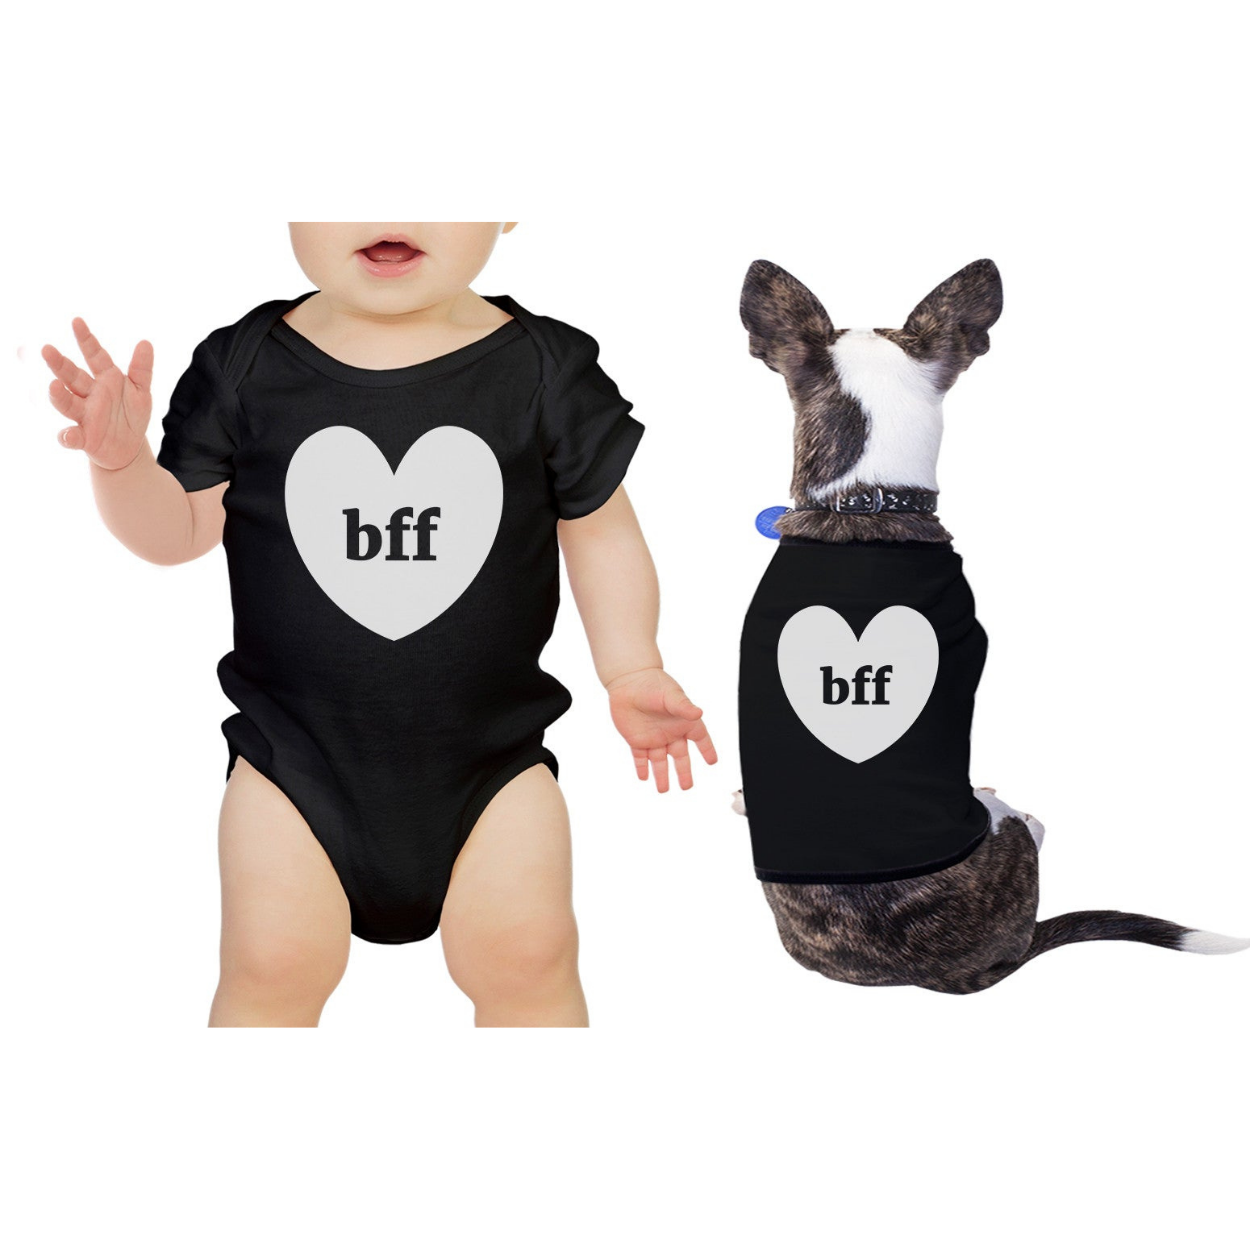 Bff Hearts Baby and Pet Matching Black Shirts  365 In Love – 365 In Love -  Matching Gifts Ideas